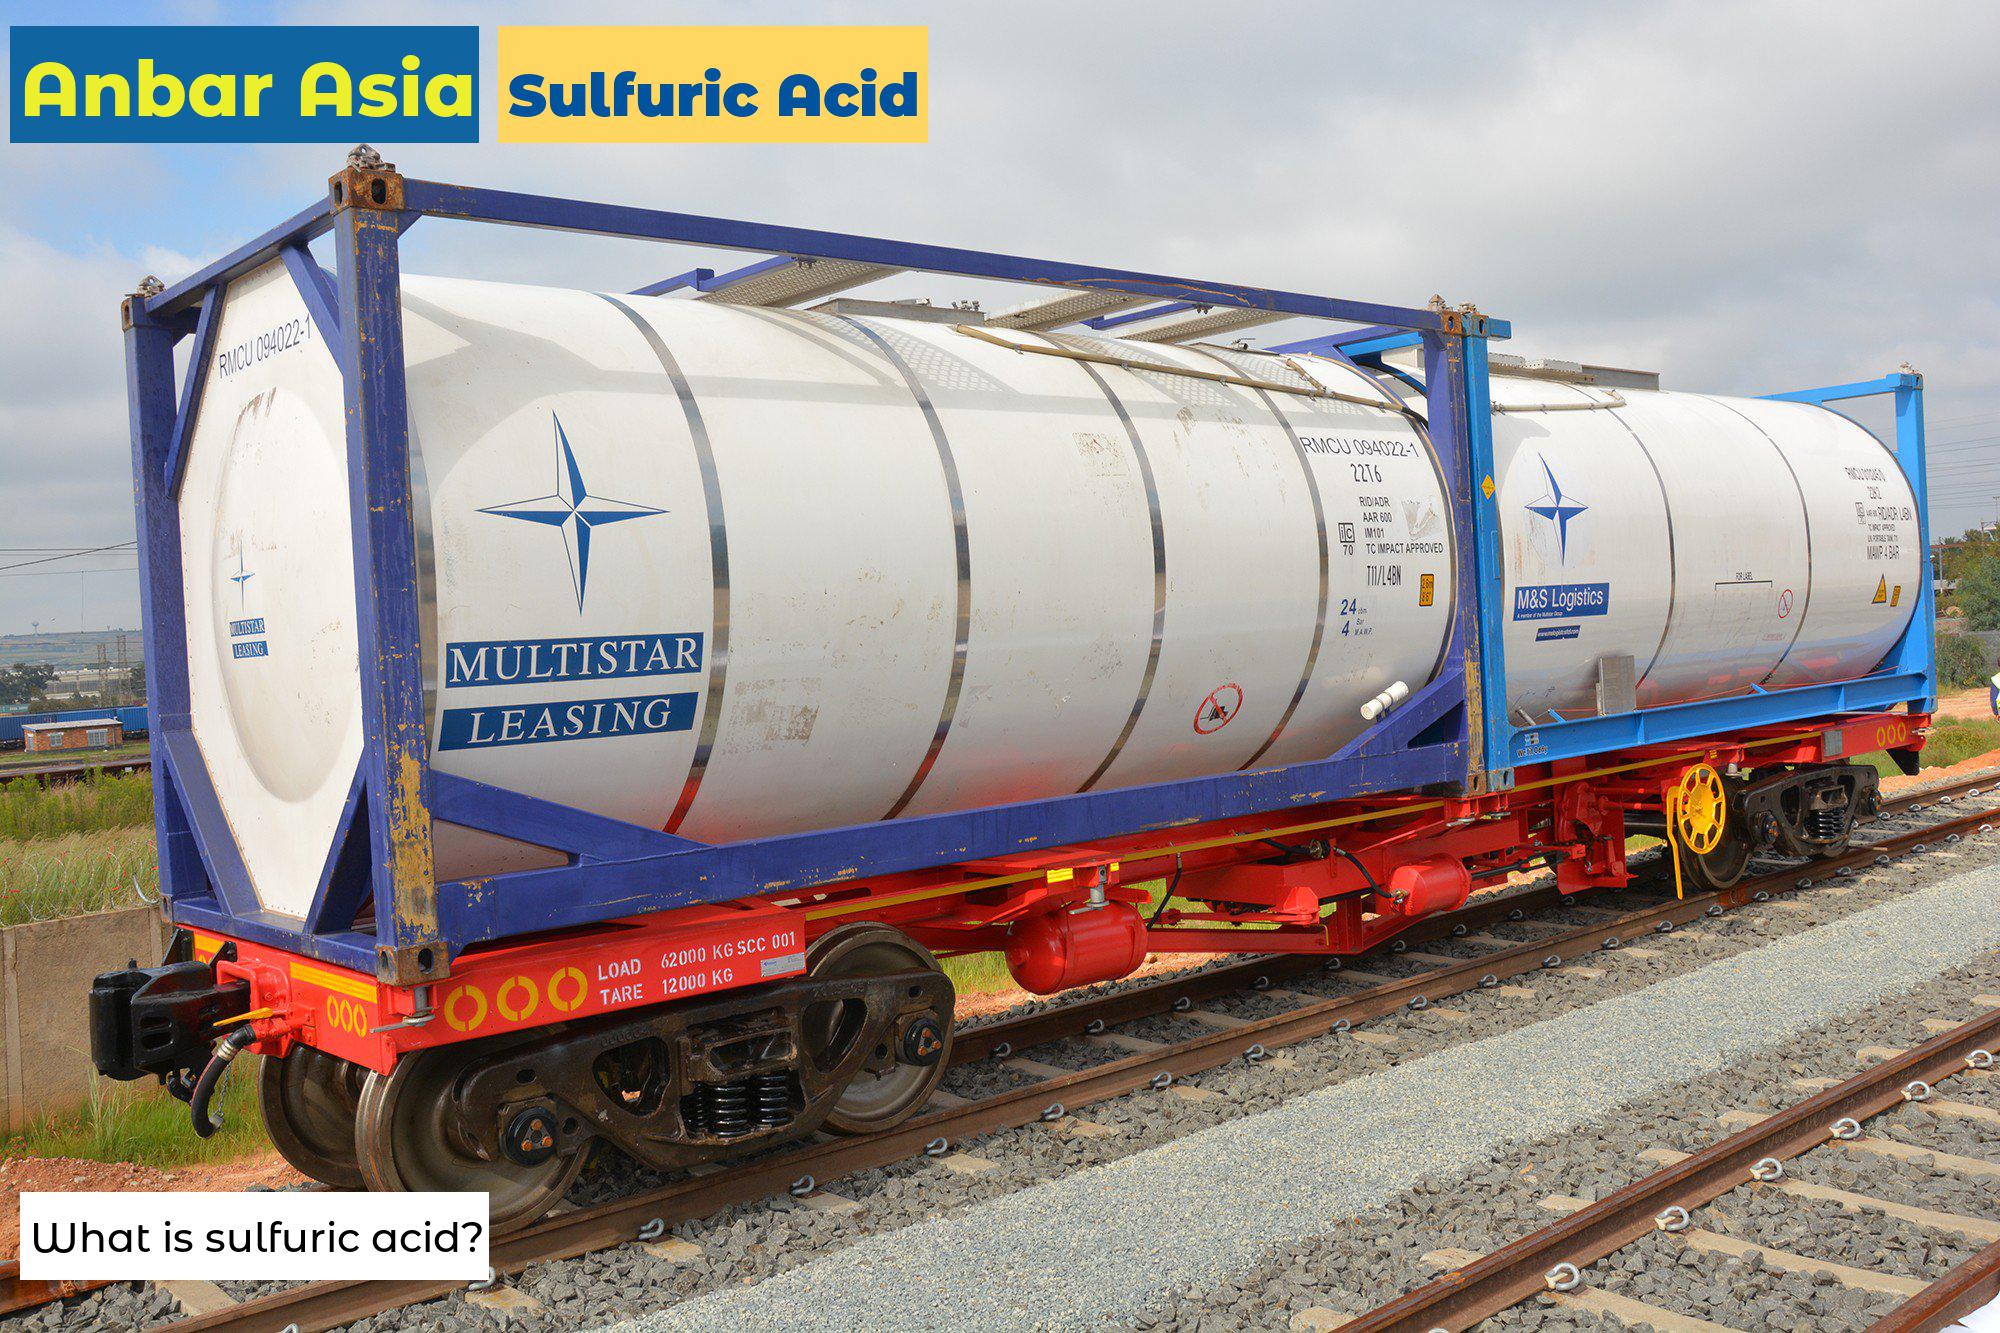 What is sulfuric acid?